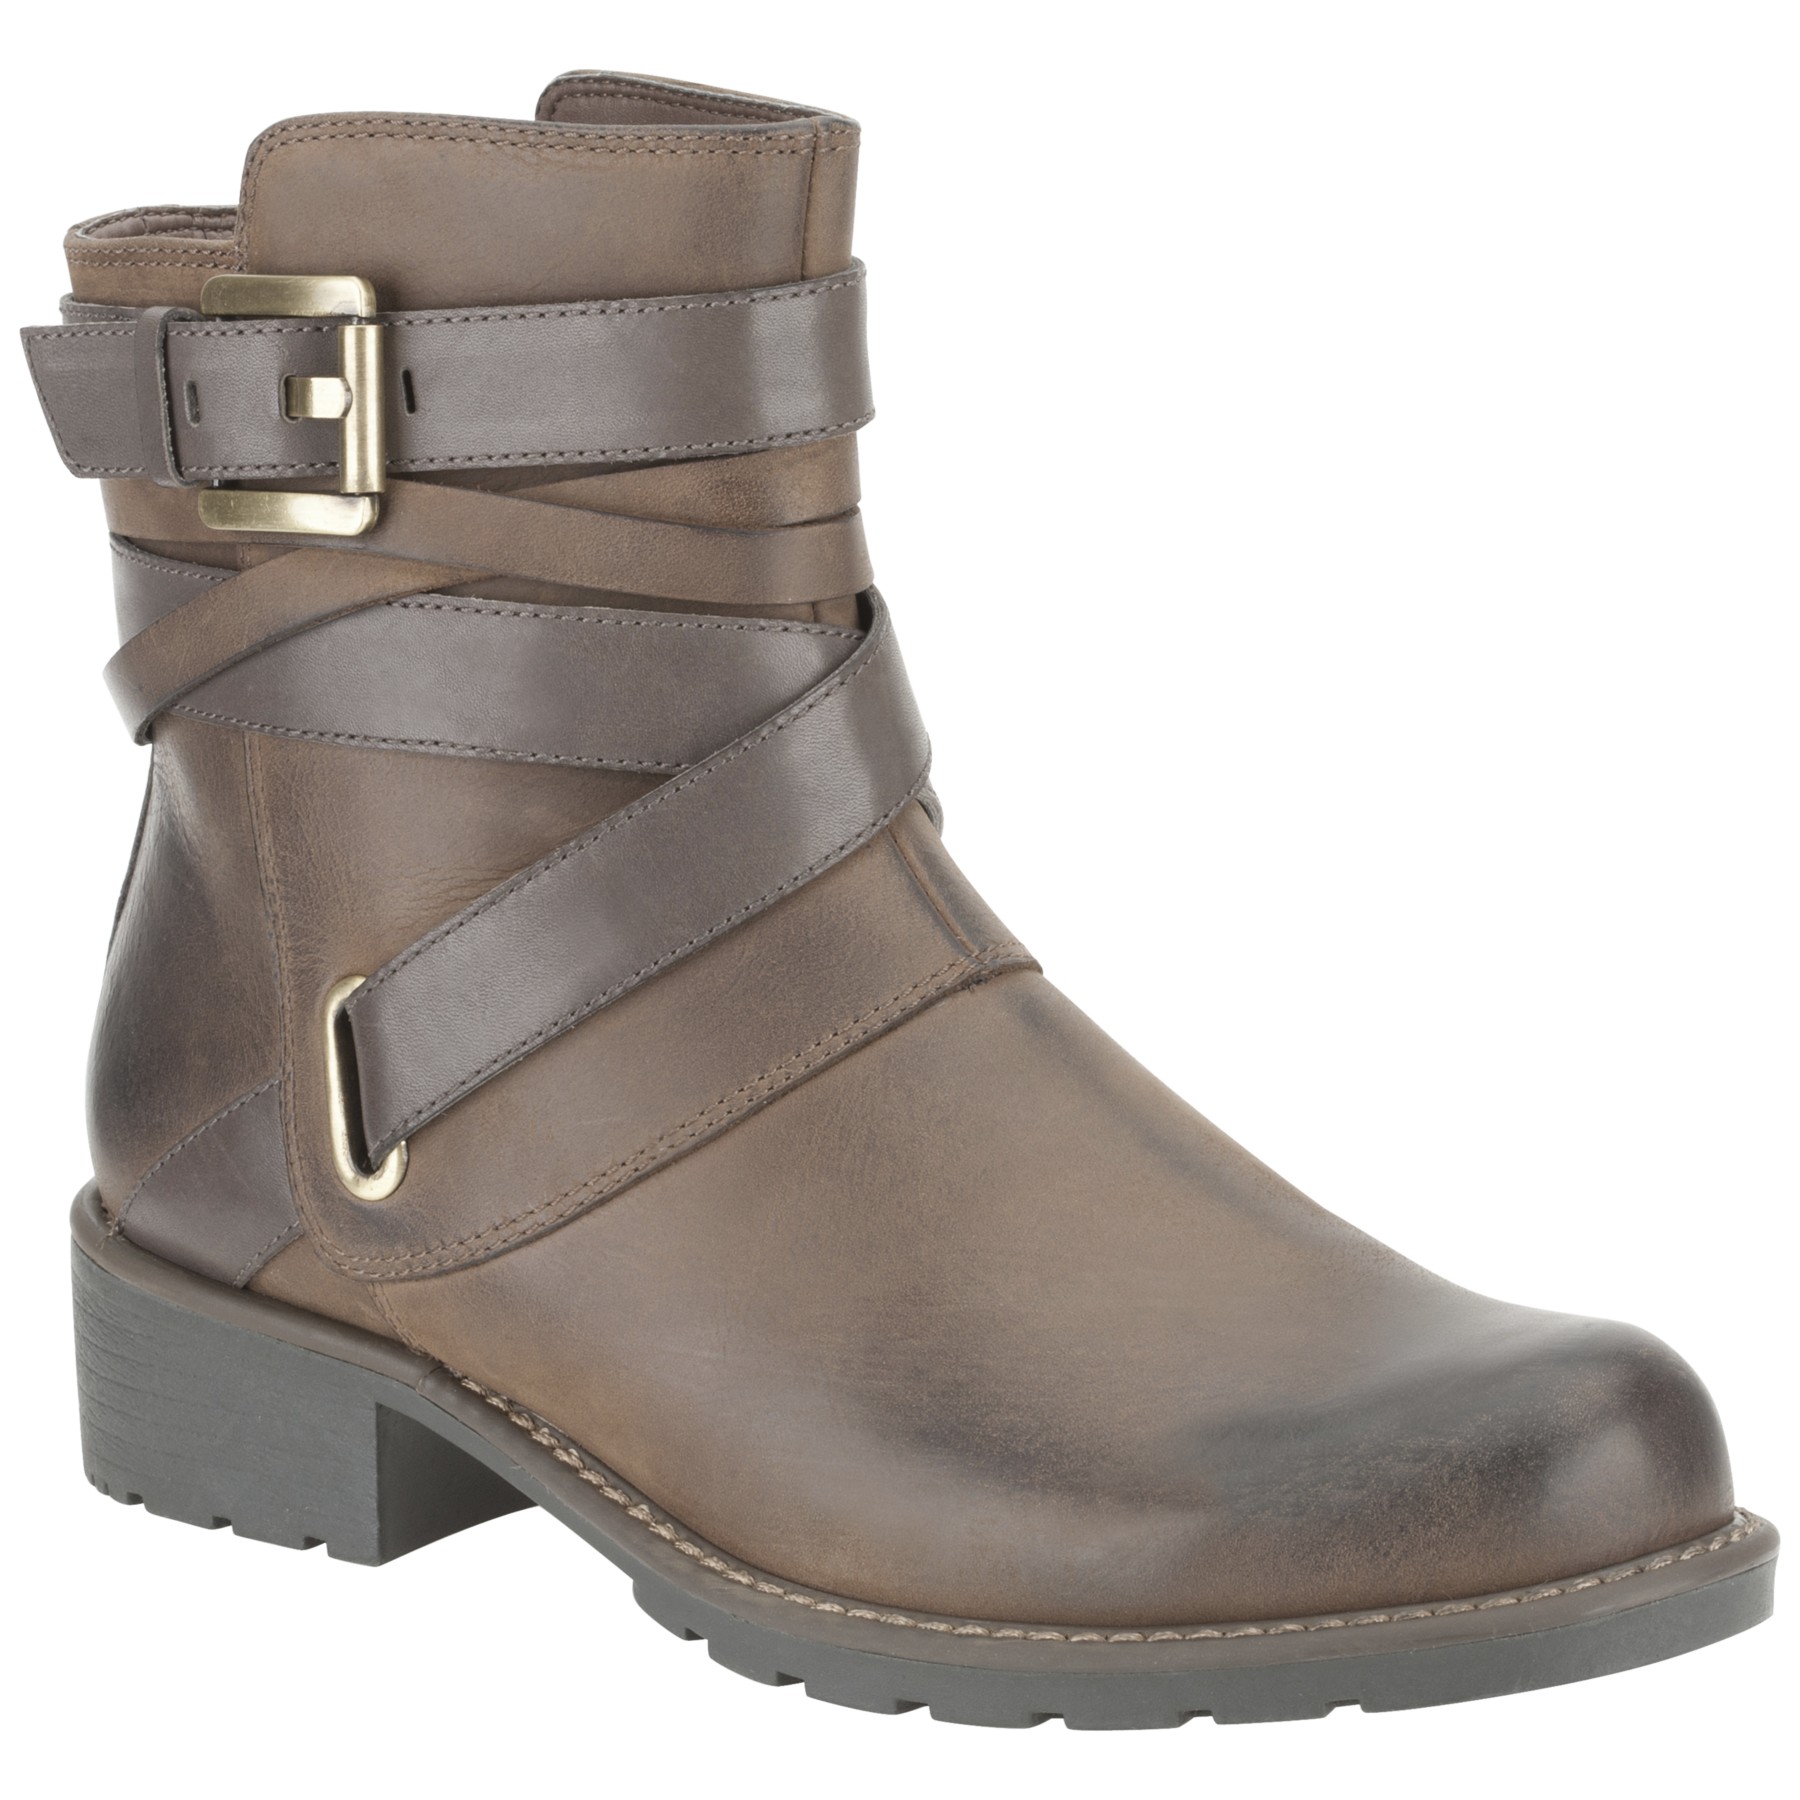 Clarks Orinoco Sash Ankle Boots in 